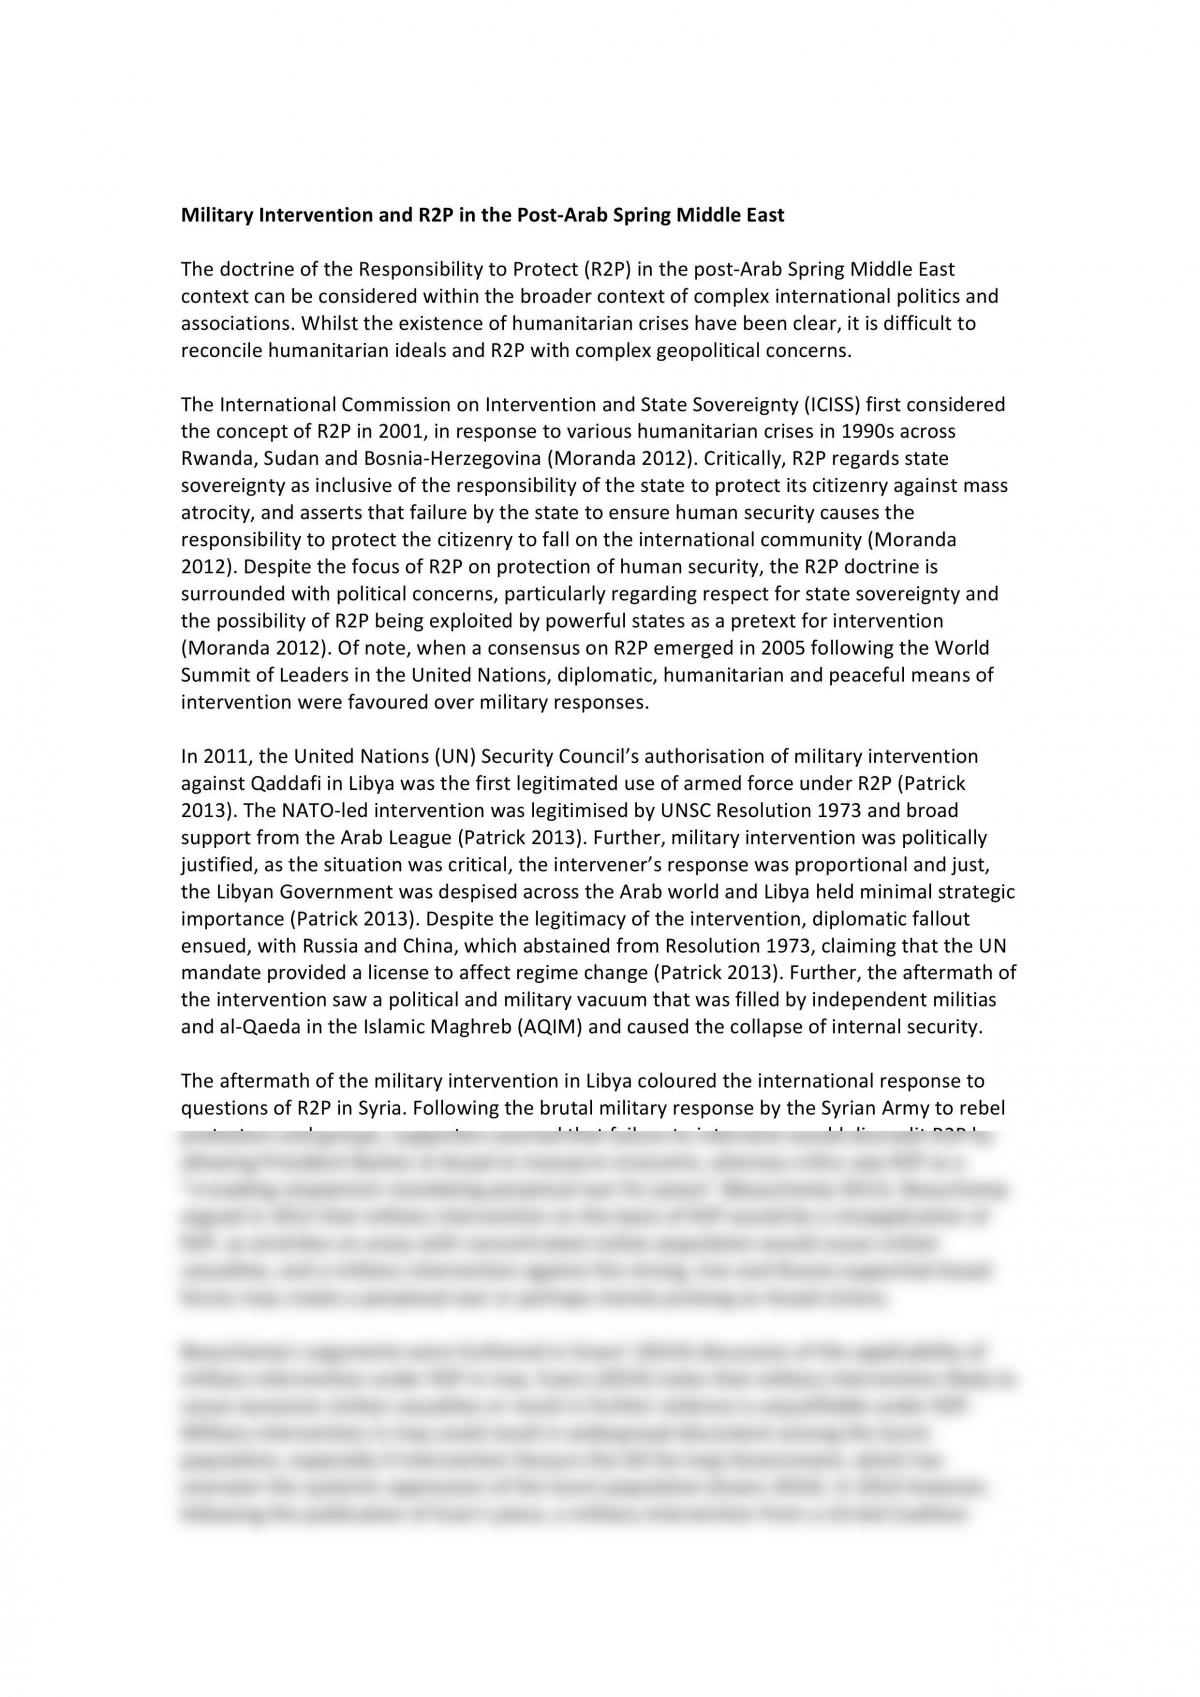 R2P in the post-Arab Spring Middle East - Page 1